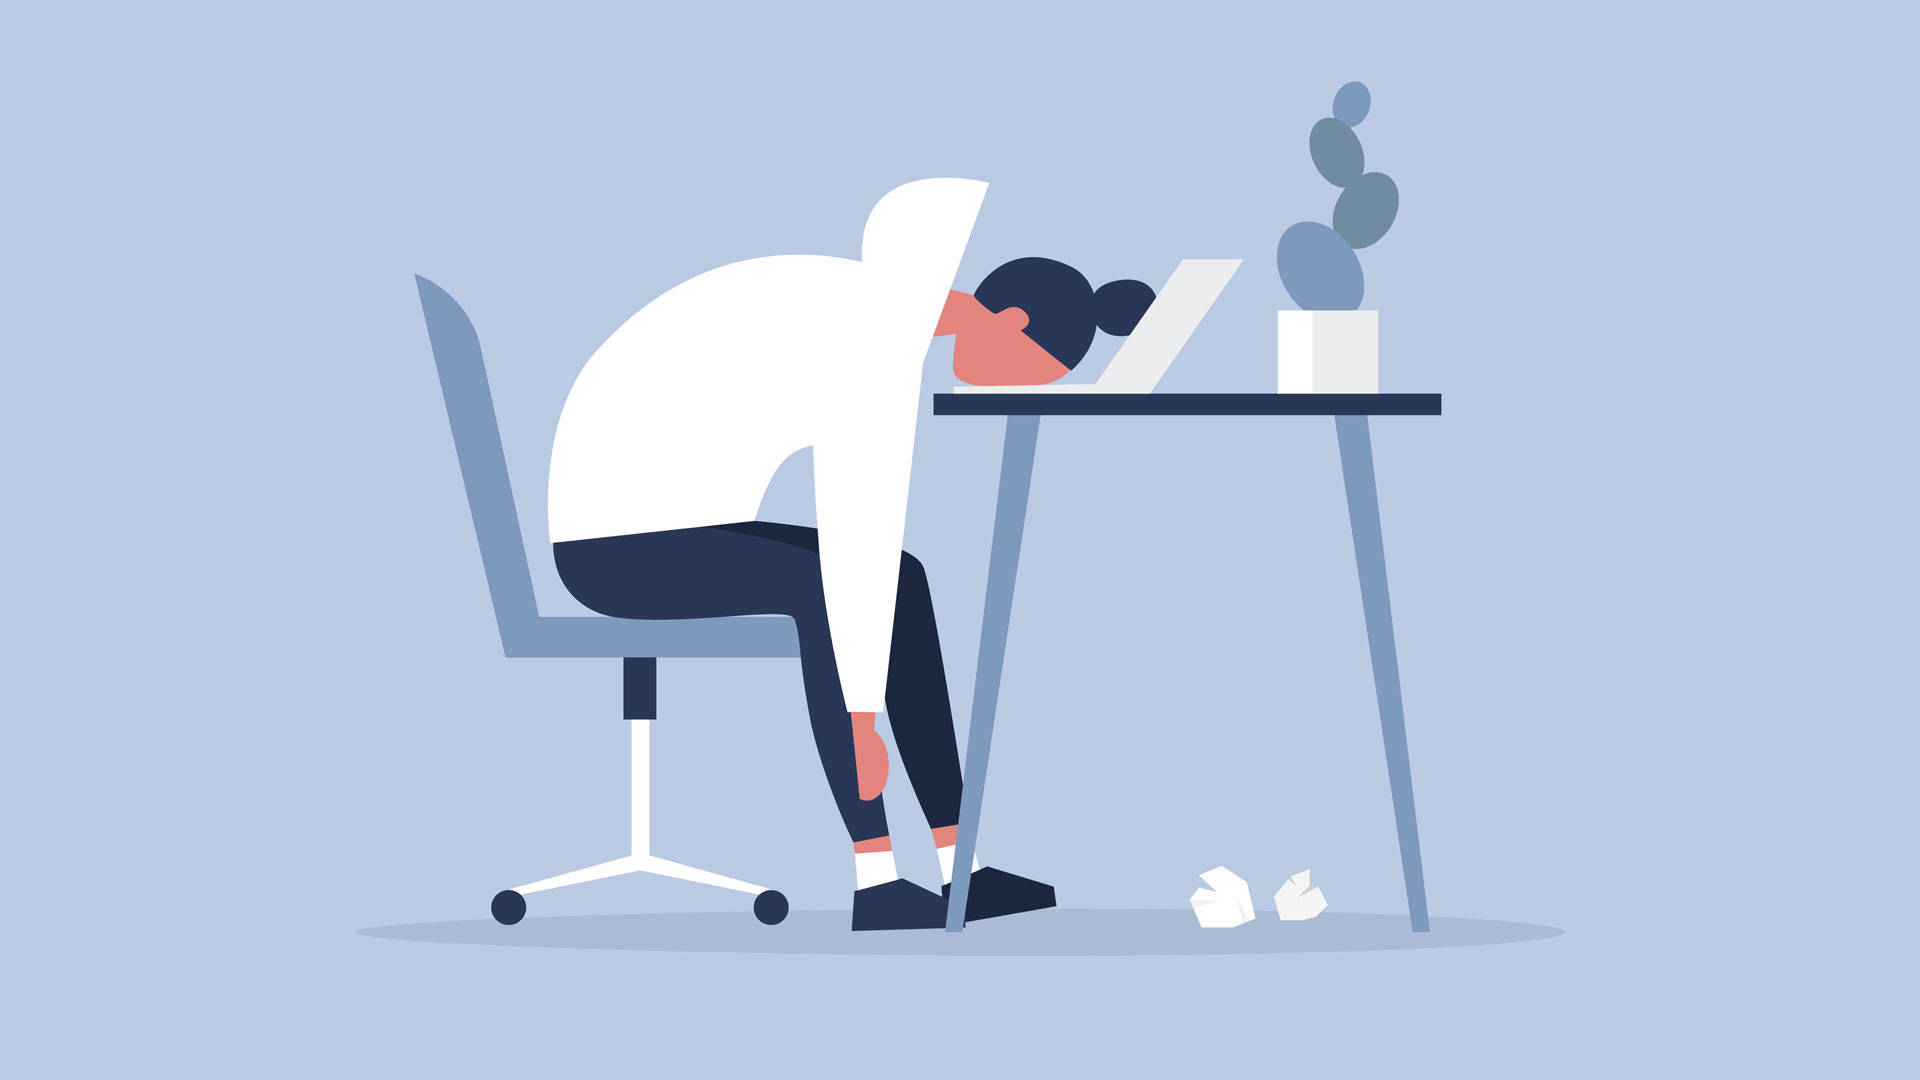 "We are left with twenty-four potentially monetizable hours that are sometimes not even restricted to our time zones or our sleep cycles," writes Jenny Odell in her new book, 'How To Do Nothing.' Illustration by Nadia Bormotova/iStock